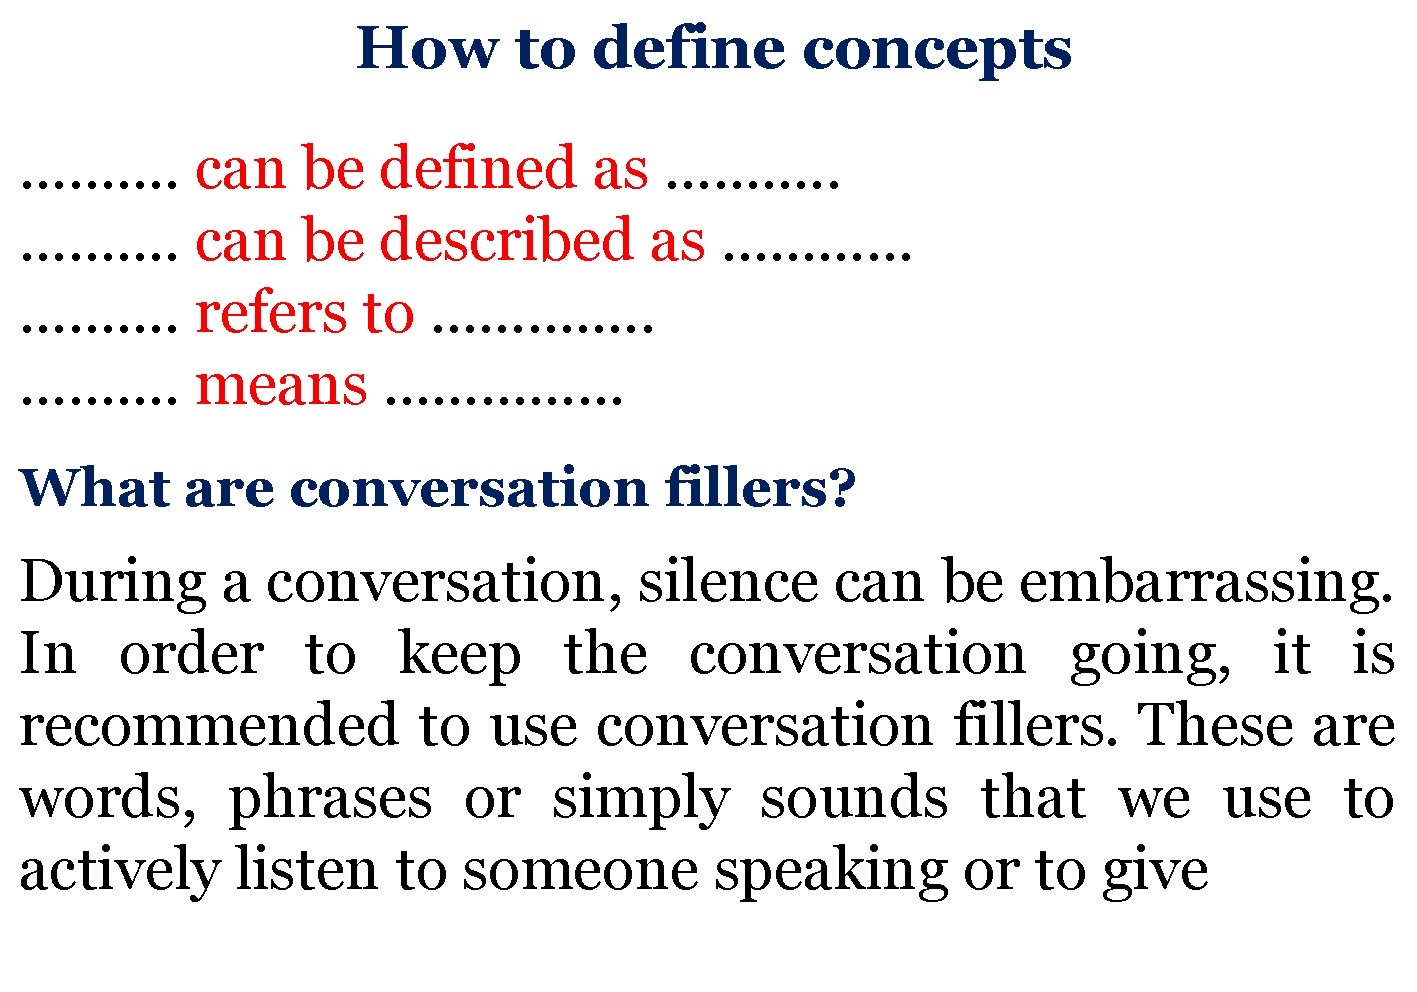 How to define concepts ………. can be defined as ………. can be described as